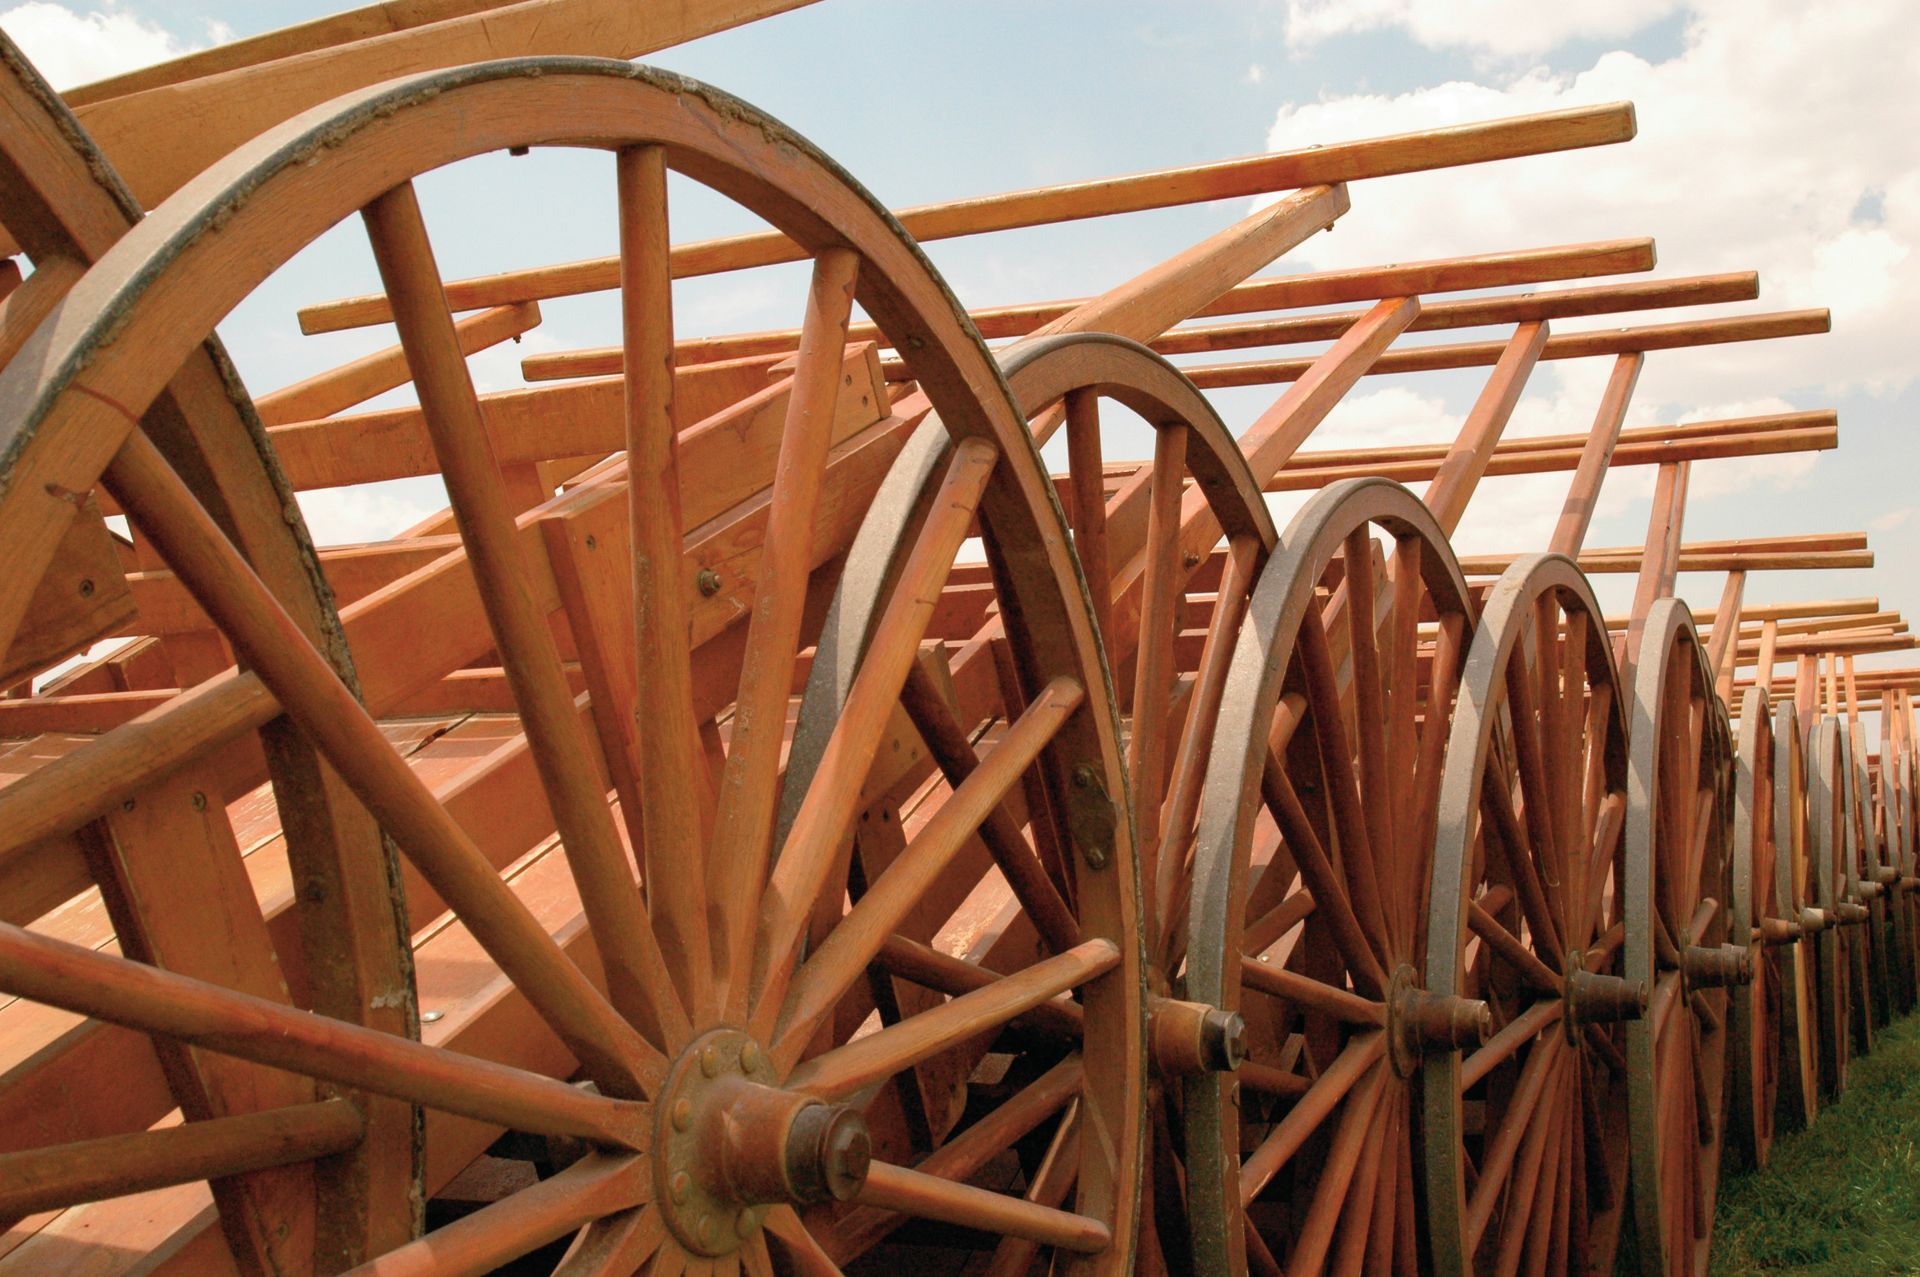 A group of wooden handcarts all lined up together.